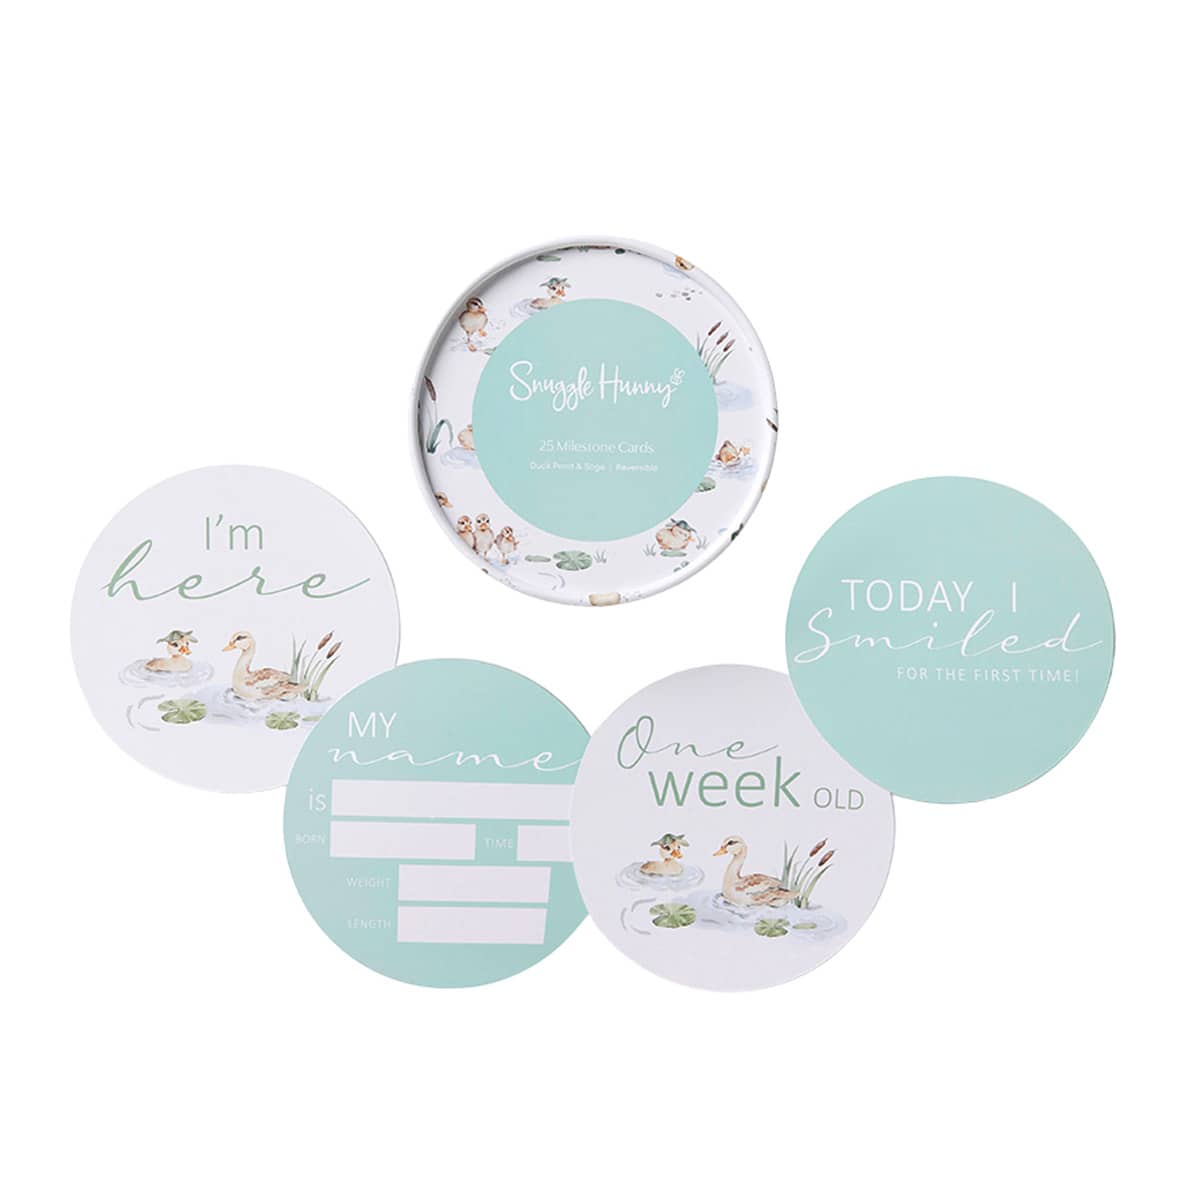 Snuggle Hunny Reversible Milestone Cards - Duck Pond and Sage